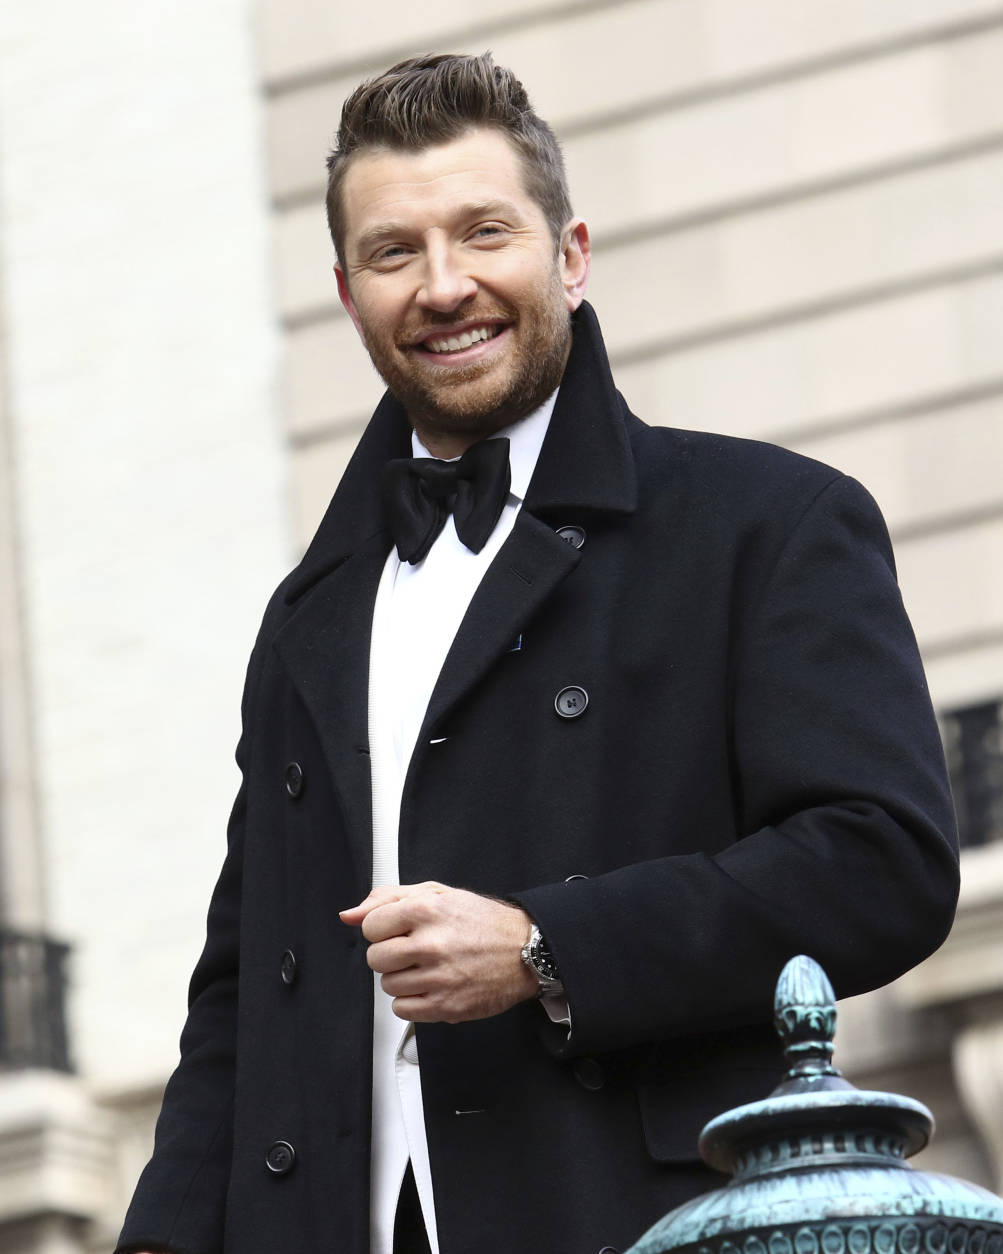 Brett Eldredge participates in the 90th Annual Macy's Thanksgiving Day Parade on Thursday, Nov. 24, 2016, in New York. (Photo by Greg Allen/Invision/AP)